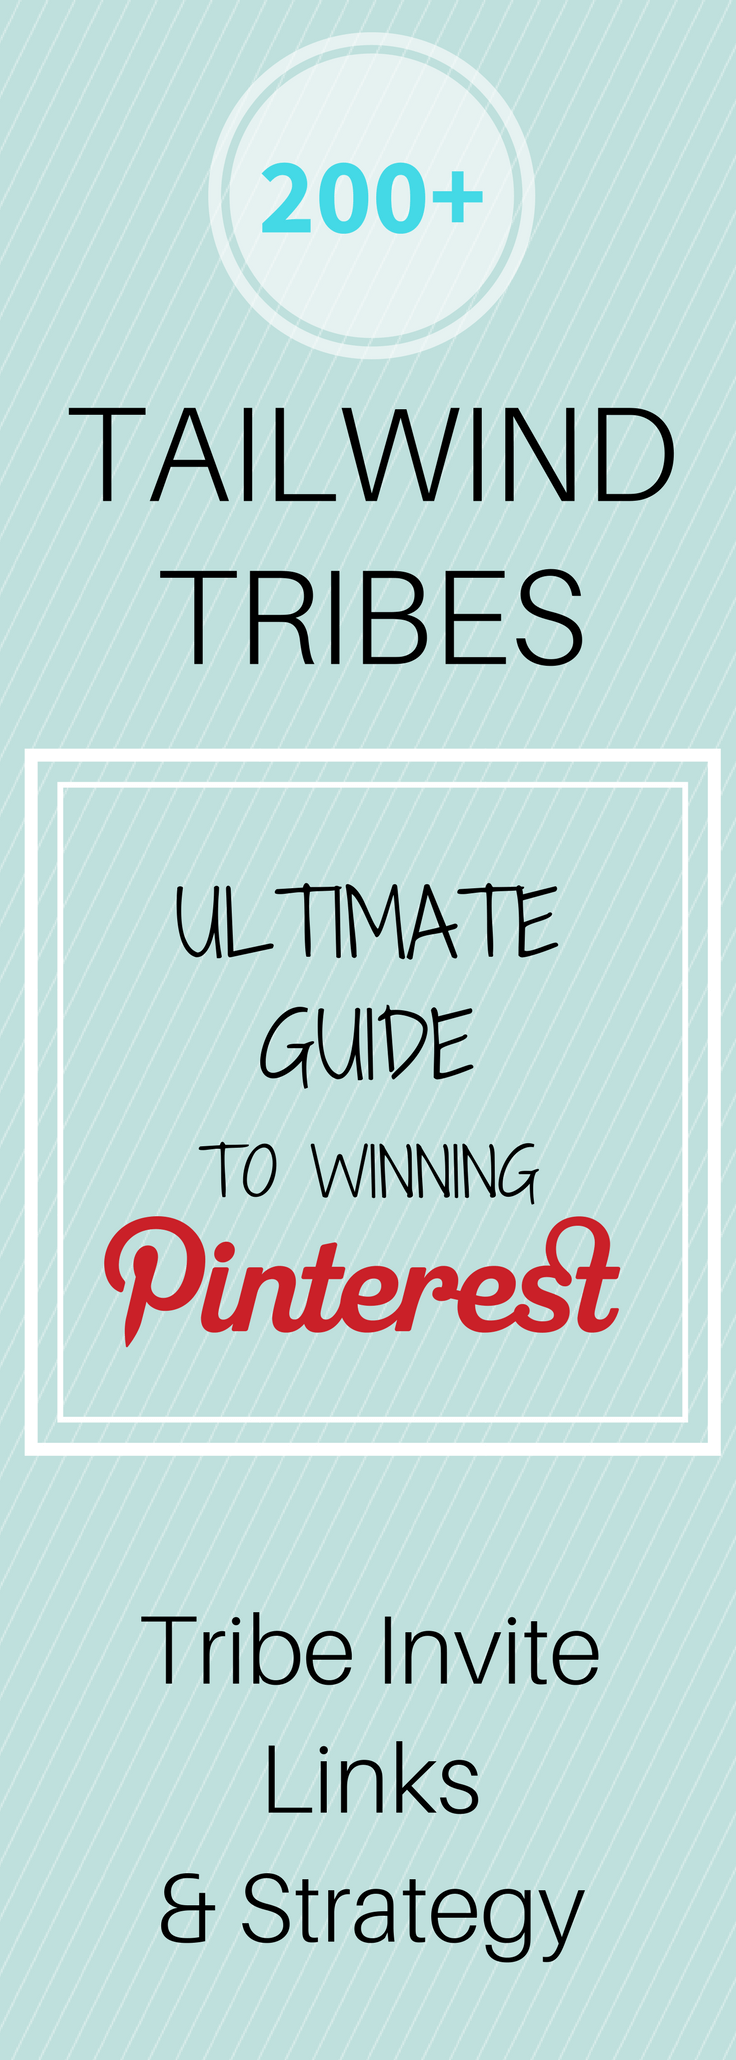 Tailwind tribes ultimate guide pinterest